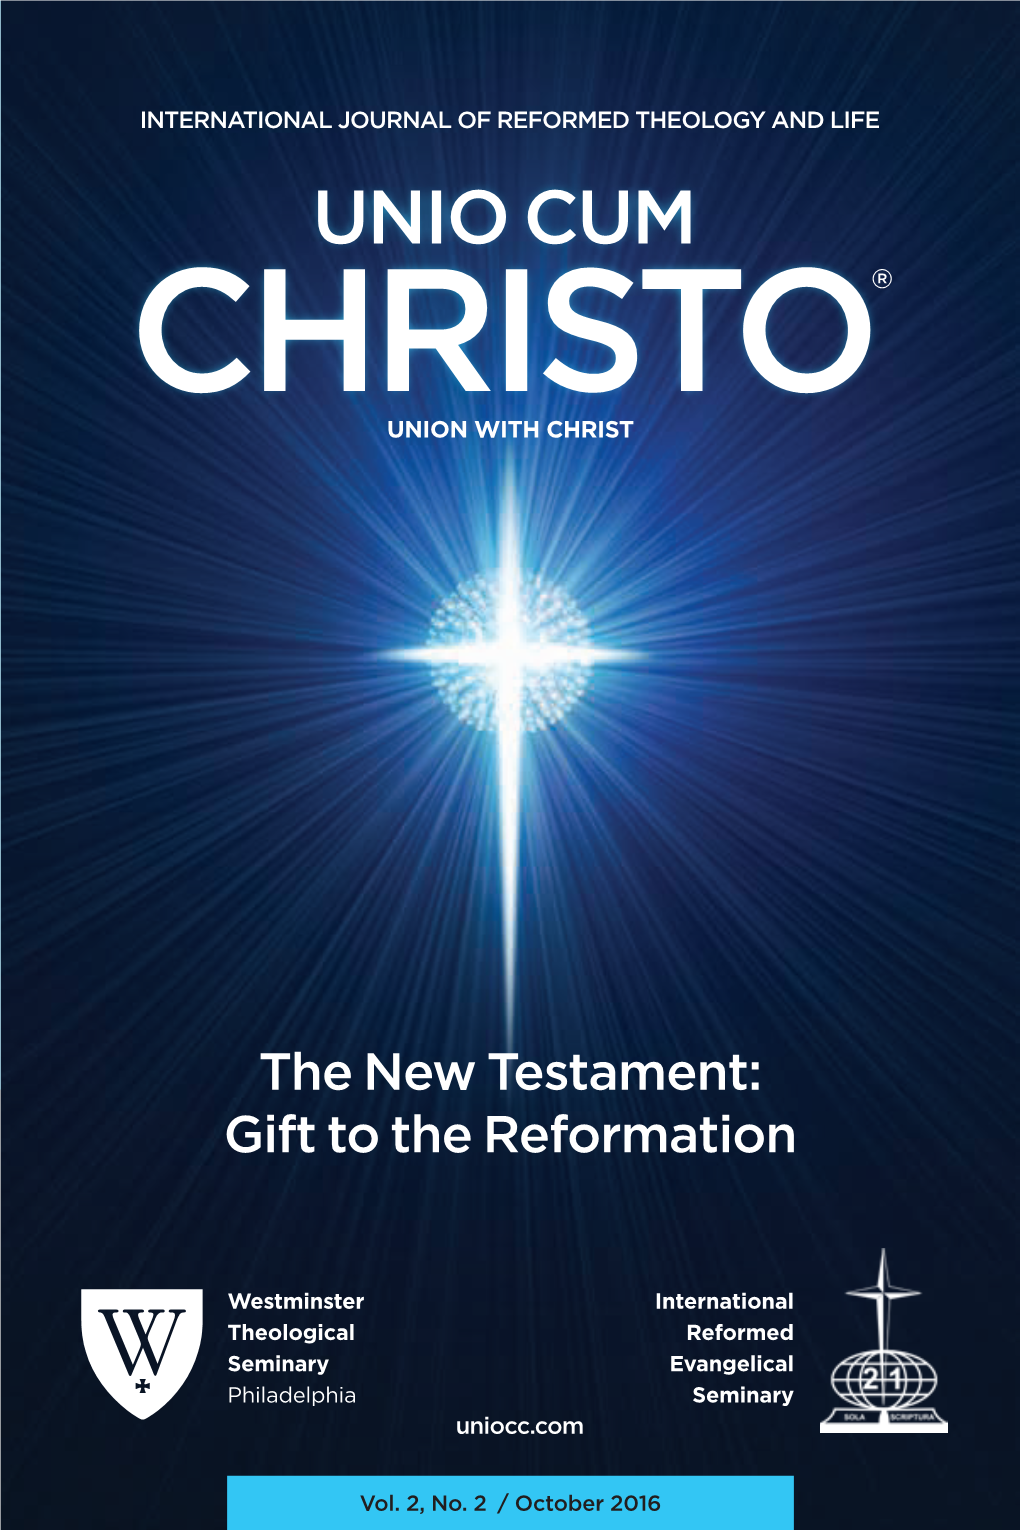 The New Testament: Gift to the Reformation